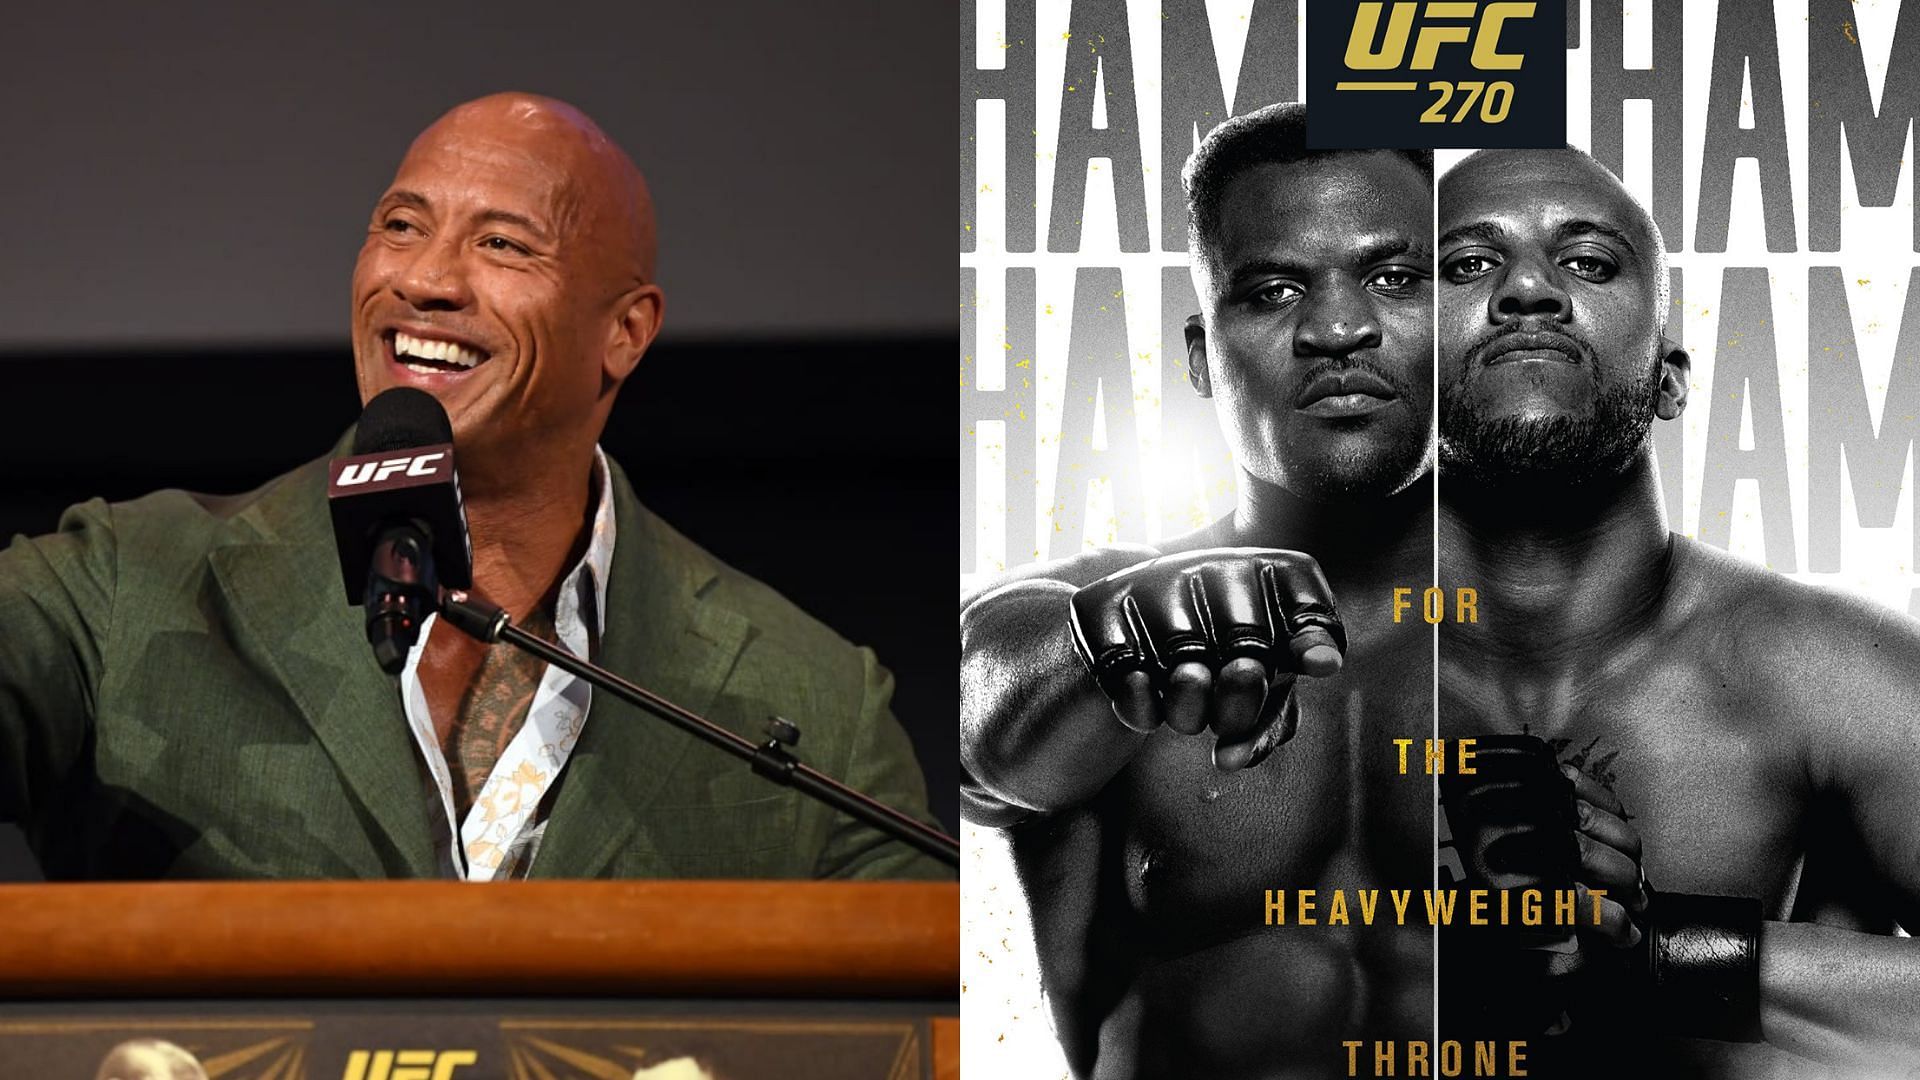 The Rock (left) and UFC 270 Ngannou vs Gane poster (right)